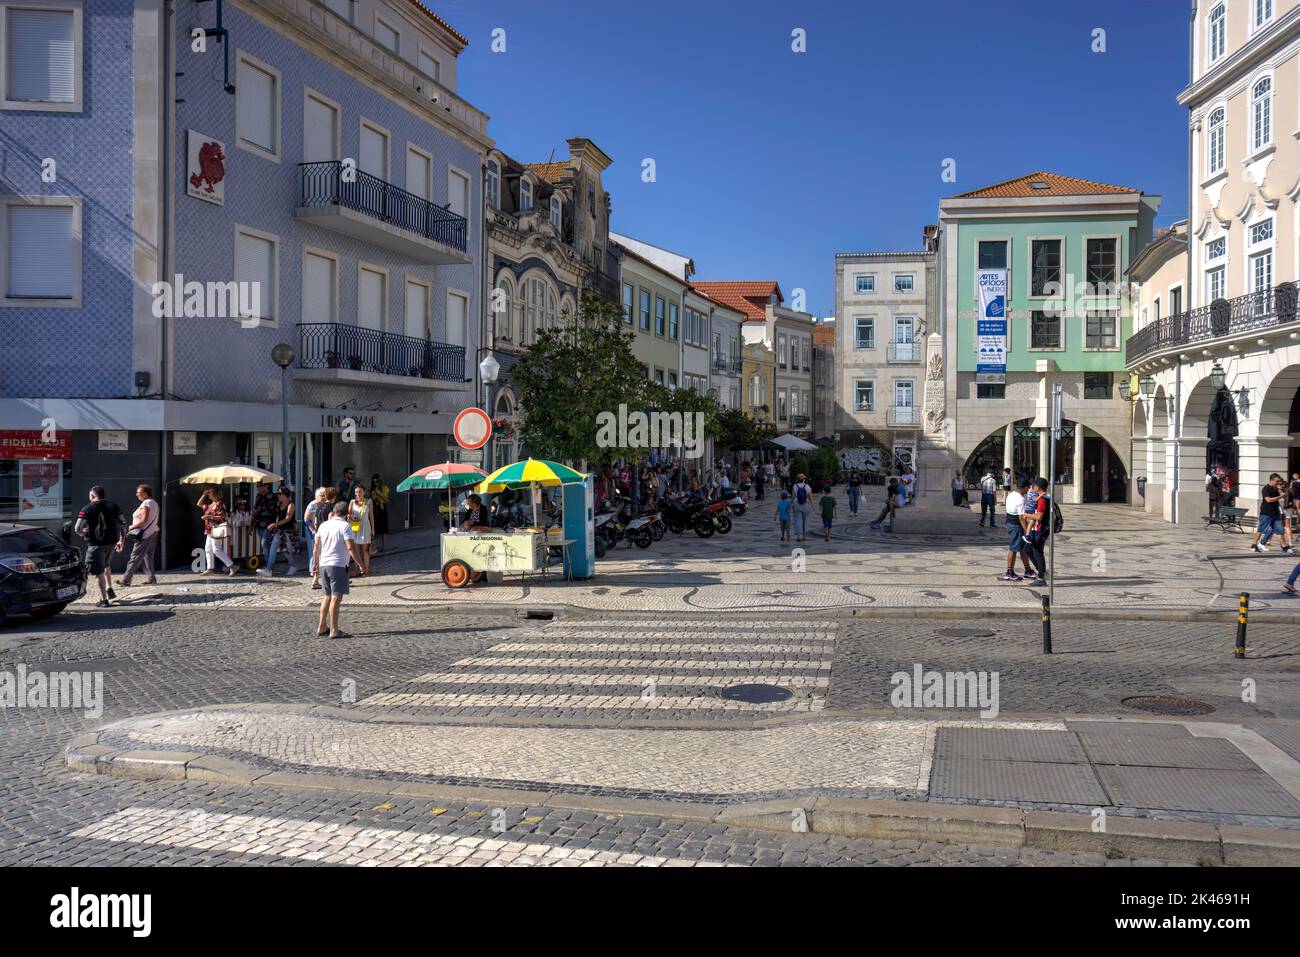 Aveiro, Portugal - August 14, 2022: Street scene with numerous motion blurred pedestrians and parked motor scooters with cobble-stoned road and crossw Stock Photo